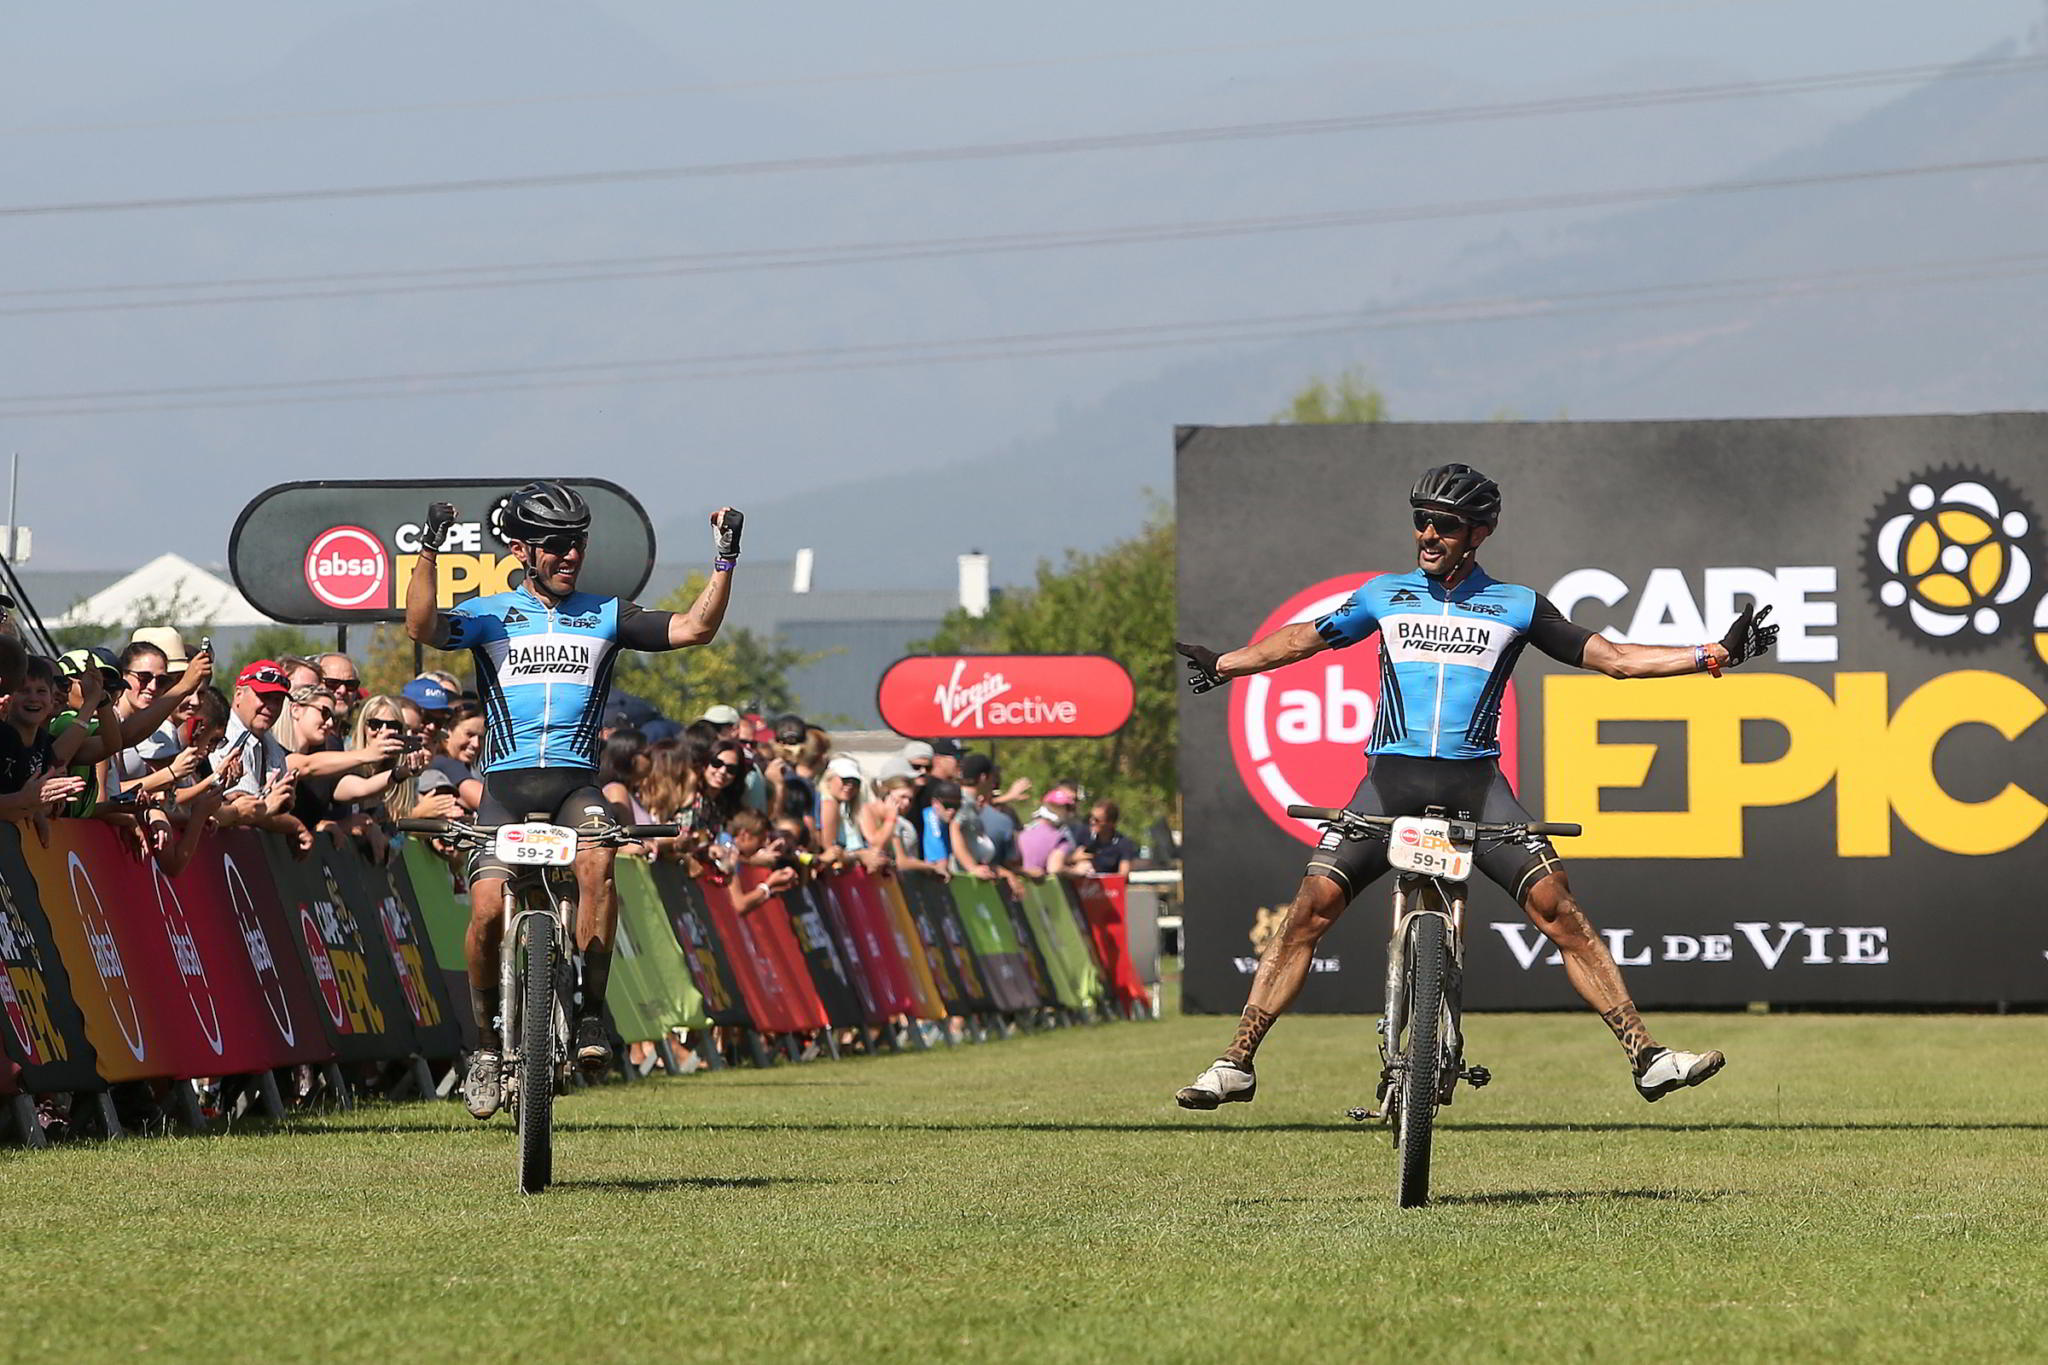 Photo by Shaun Roy/Cape Epic